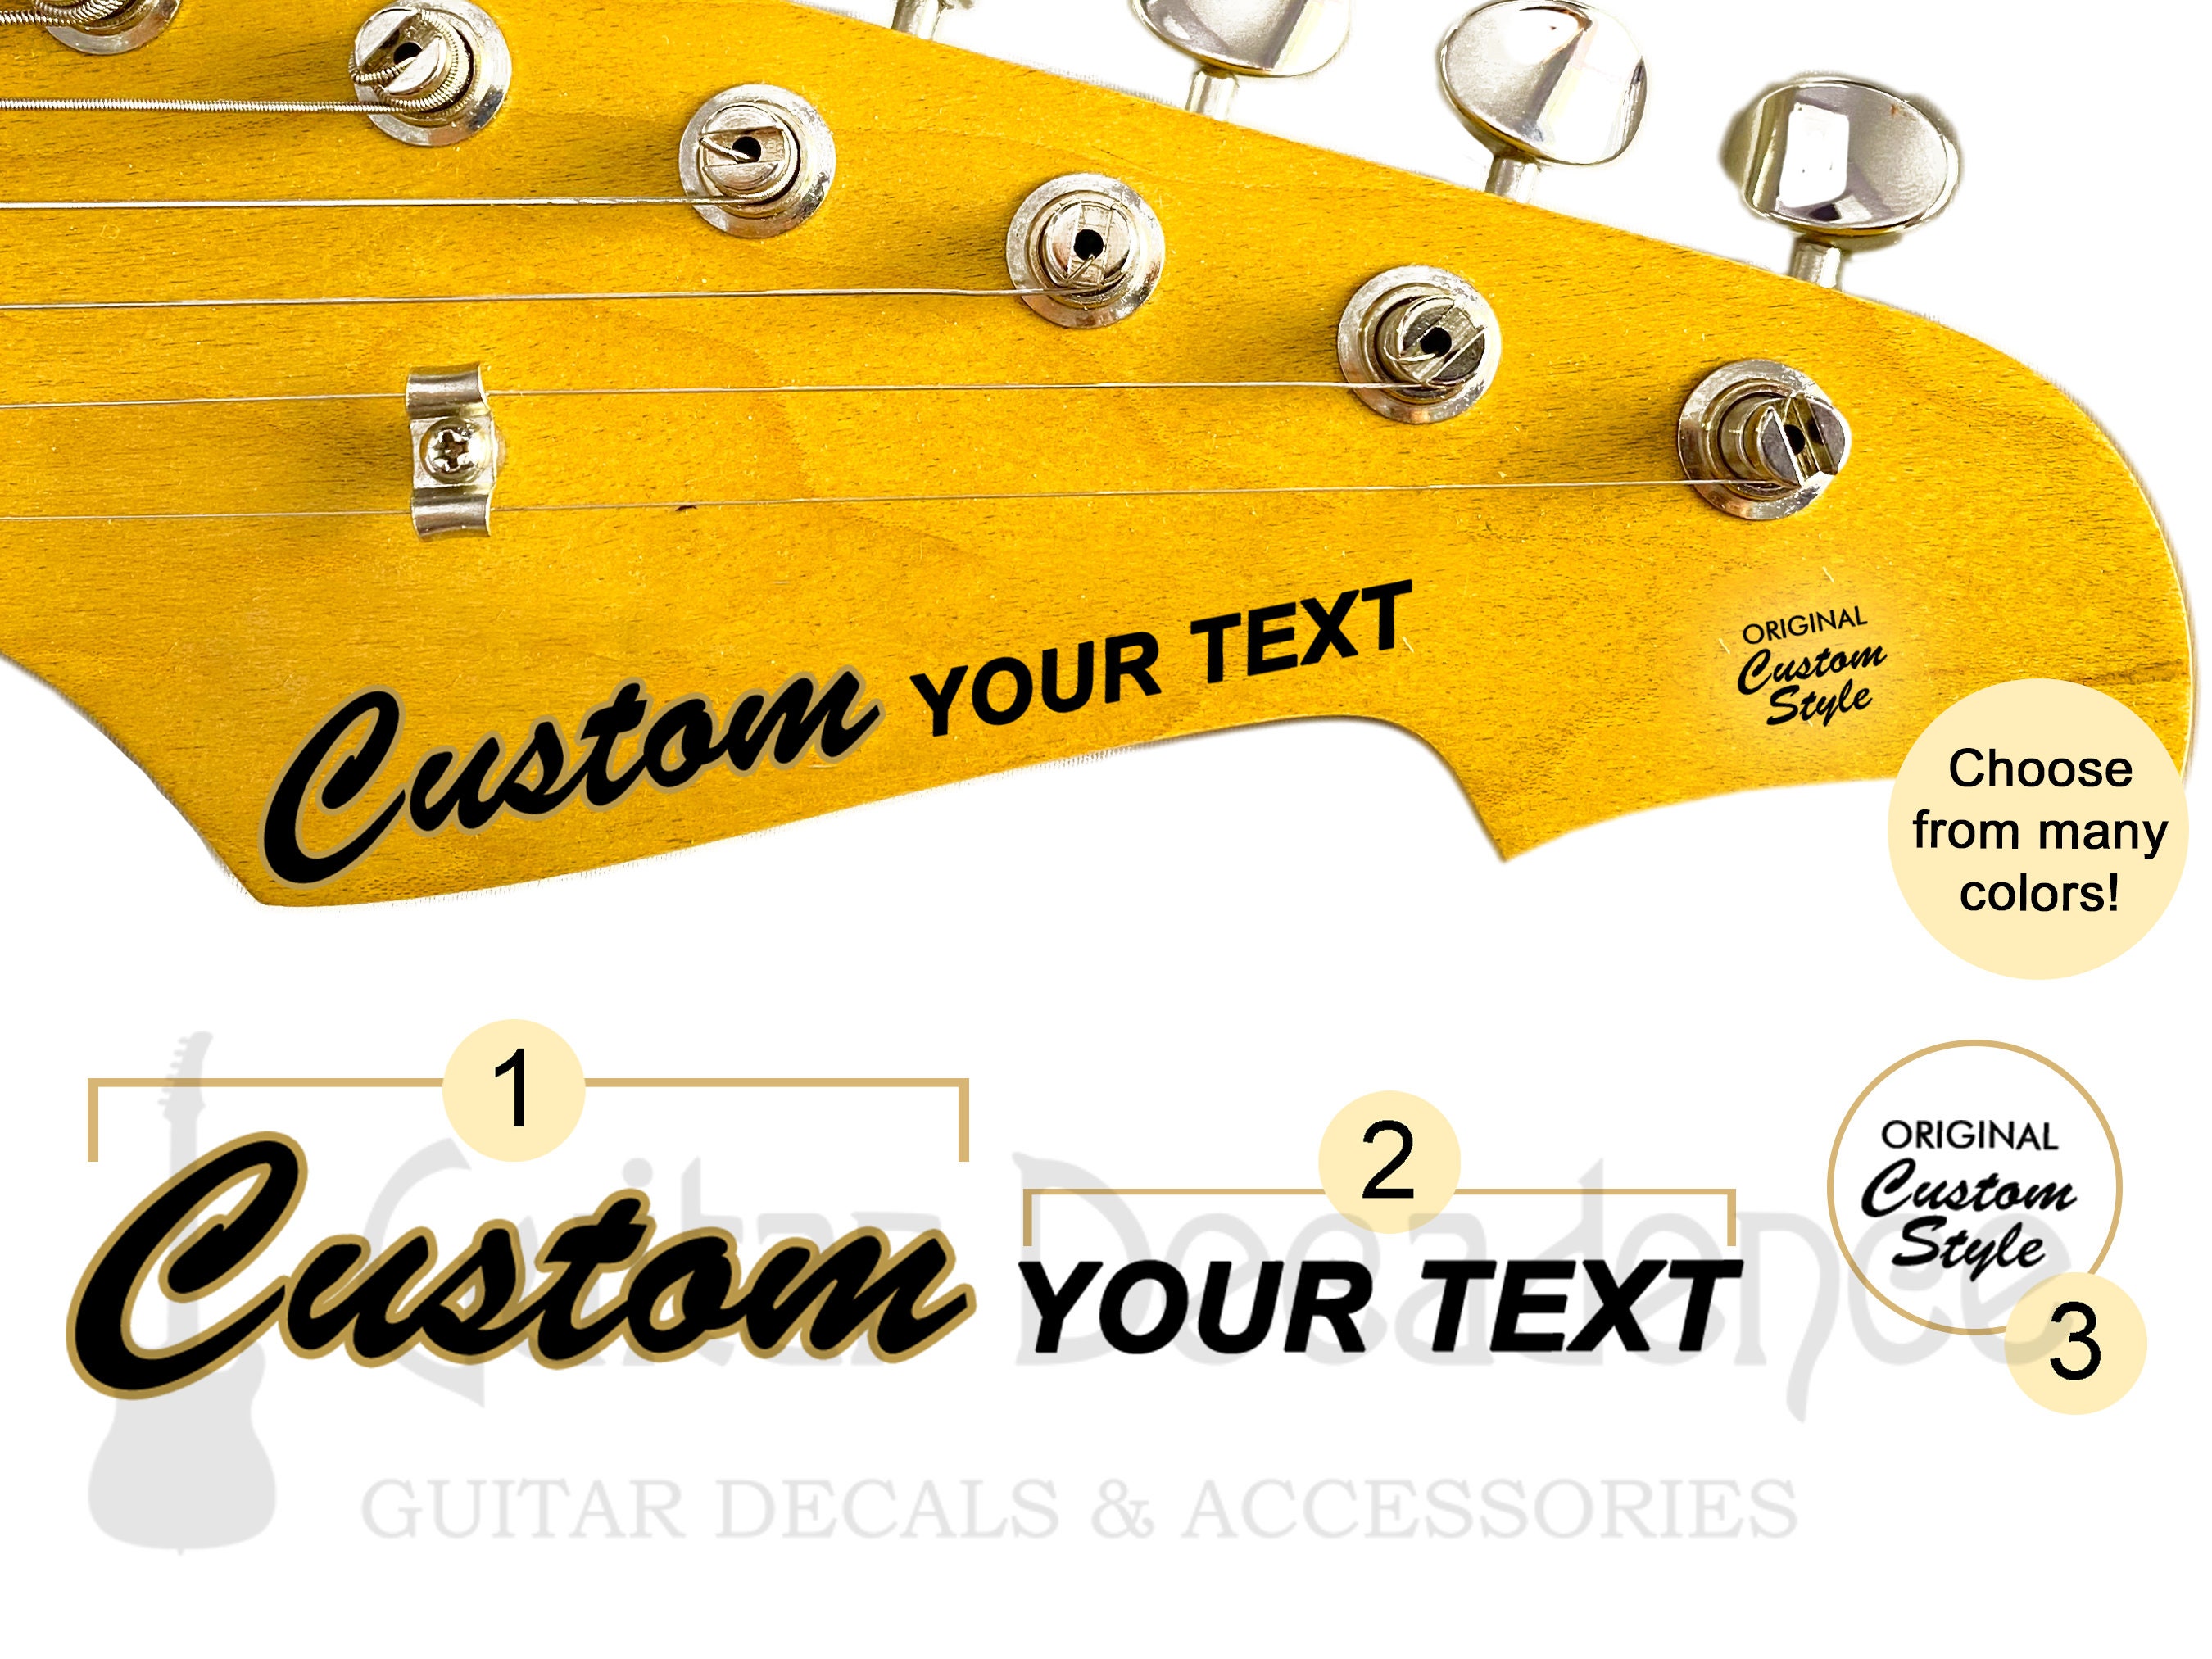 Squier Guitar Decal picture pic photo